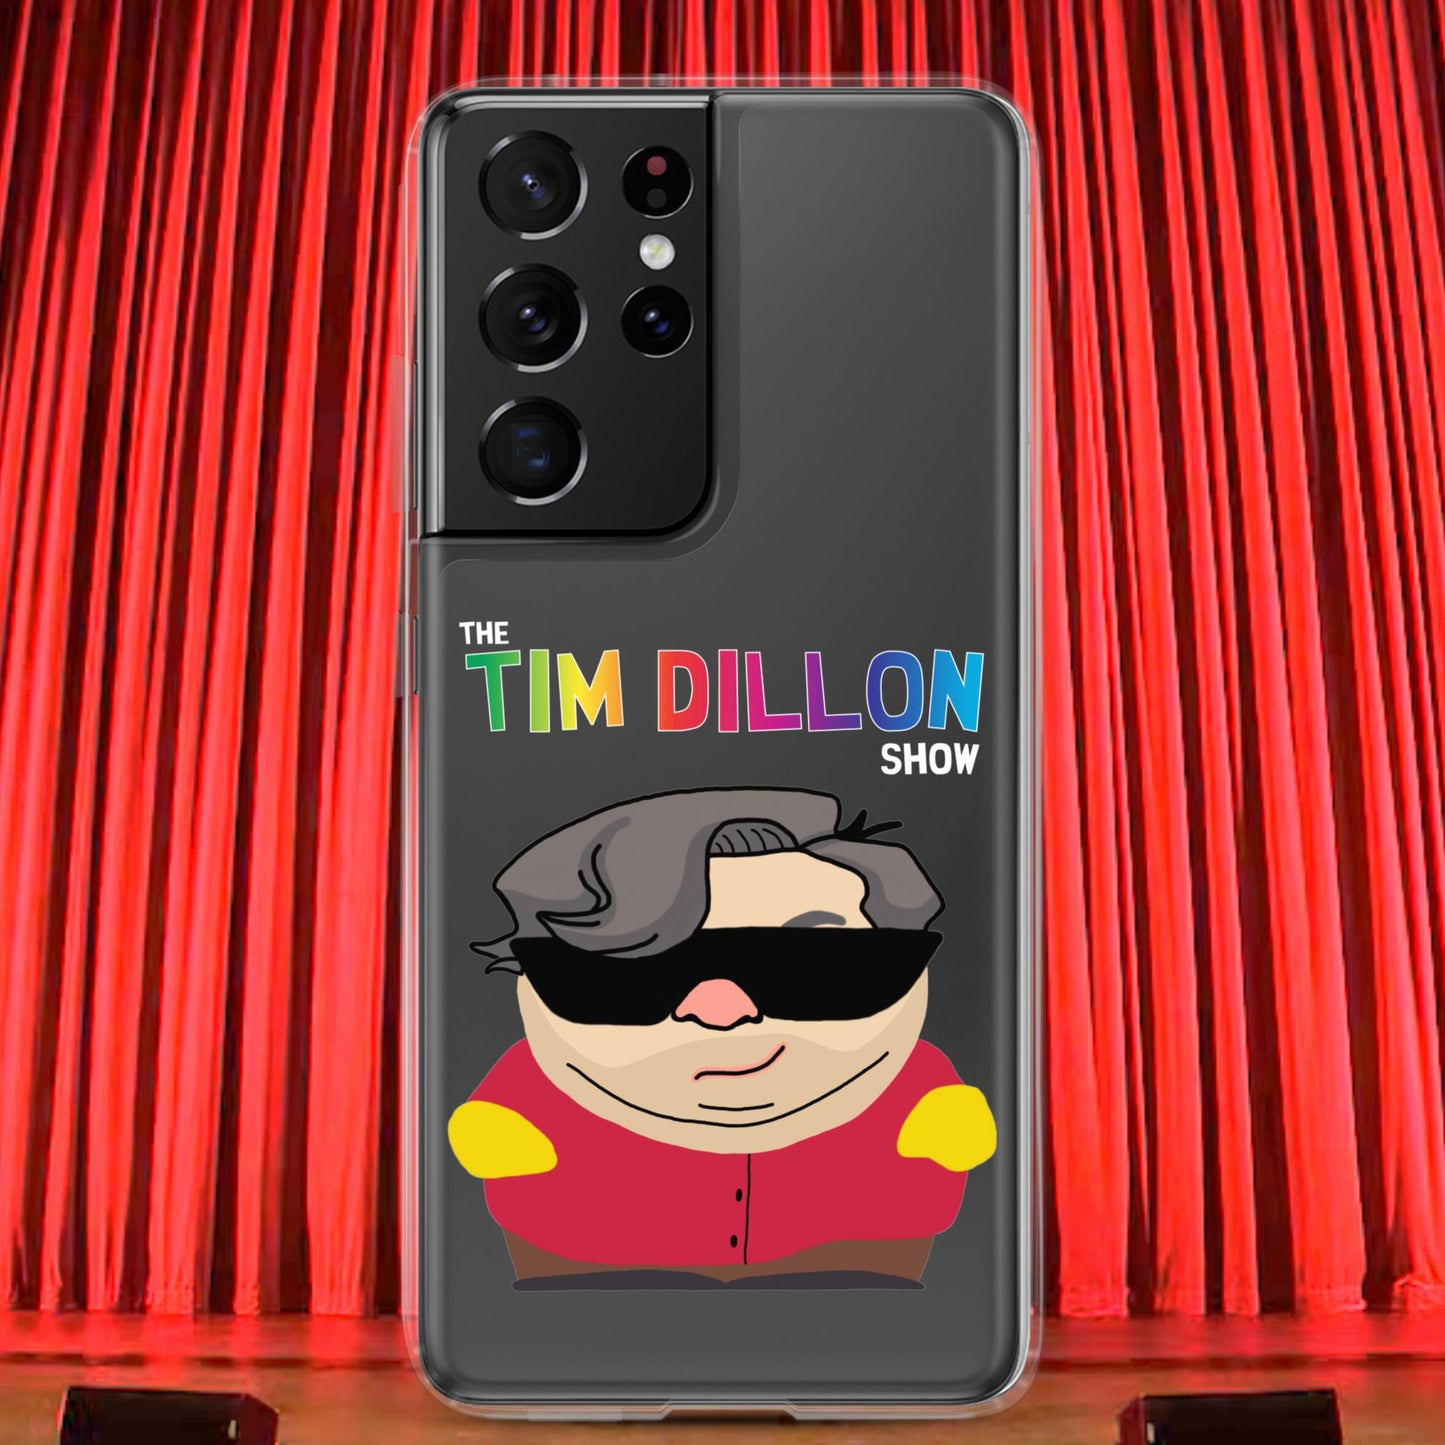 Tim Dillon Cartman, Southpark, The Tim Dillon Show, Tim Dillon Podcast, Tim Dillon Merch, Tim Dillon Clear Case for Samsung Next Cult Brand Podcasts, Stand-up Comedy, Tim Dillon